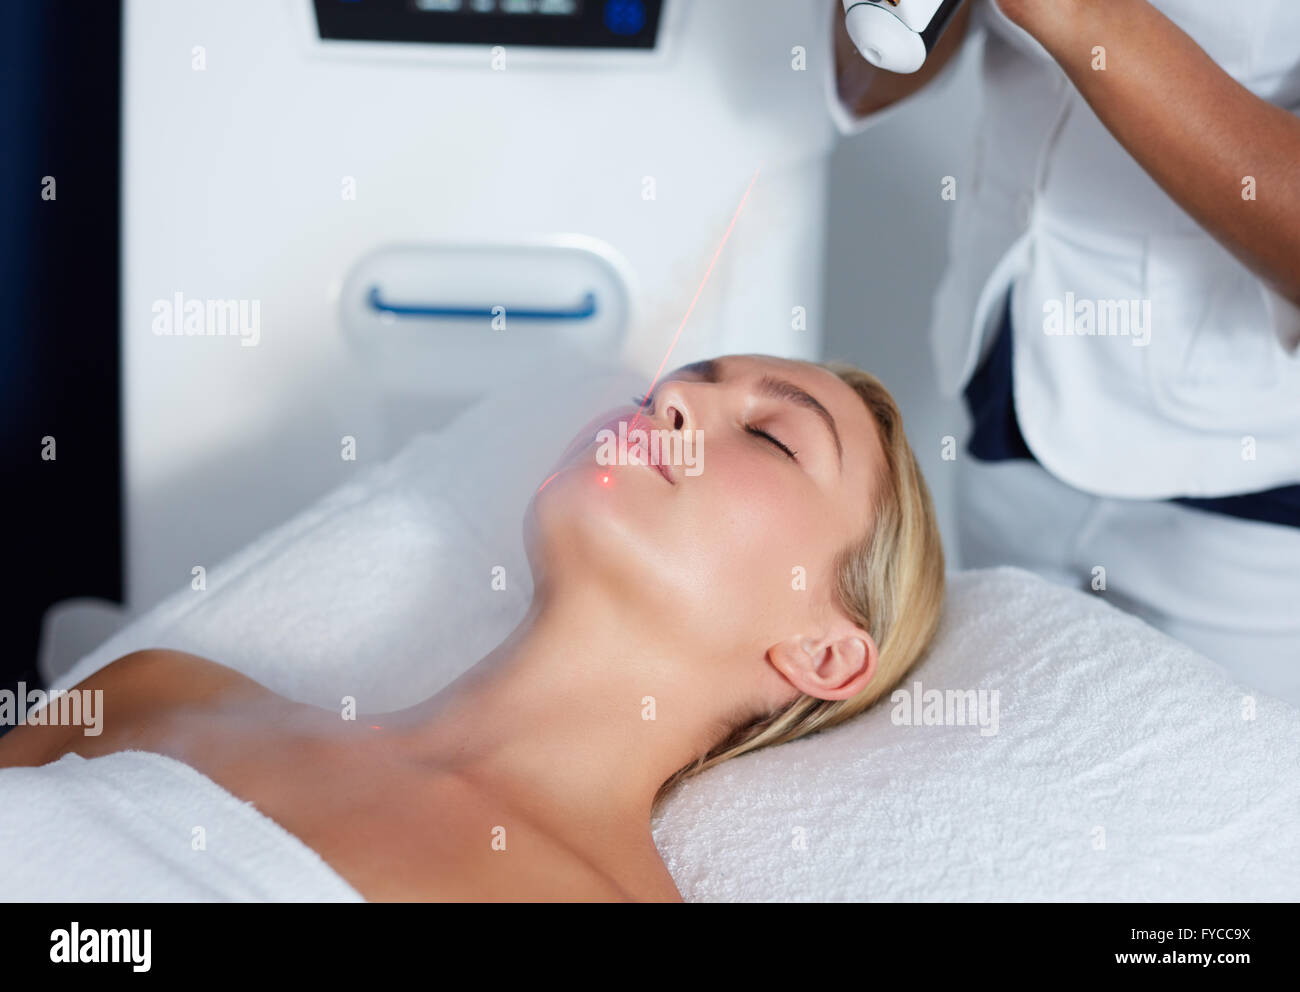 Attractive young woman getting local cryotherapy therapy at cosmetology clinic. Applying cold nitrogen vapors to the face of wom Stock Photo